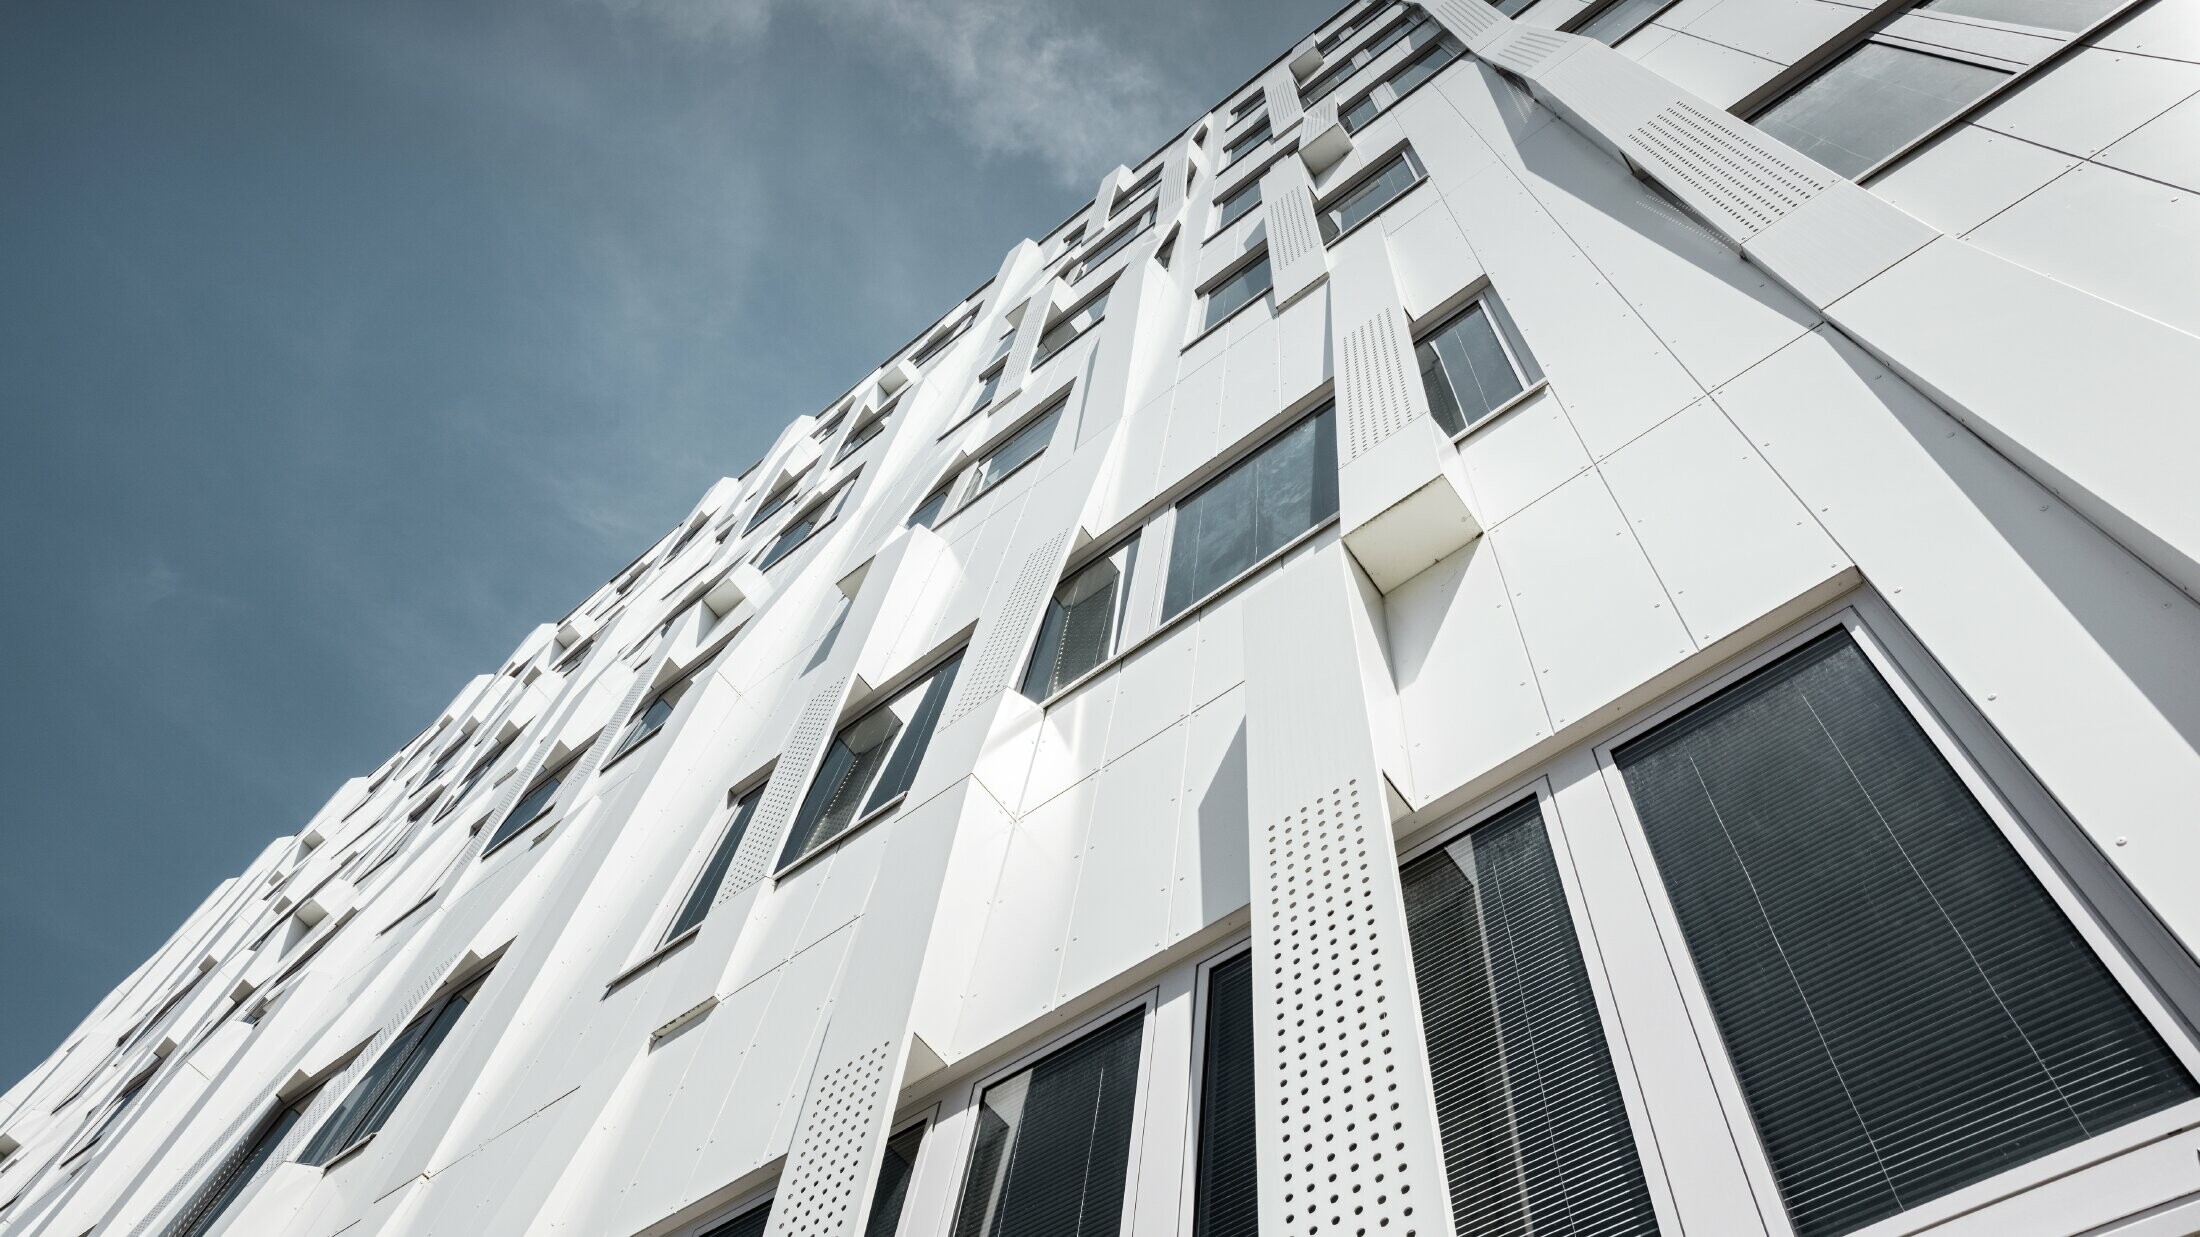 Special 3D façade, with perforated aluminium composite panel cassettes and normal PREFA composite panels in pure white, PREFA cassette façade